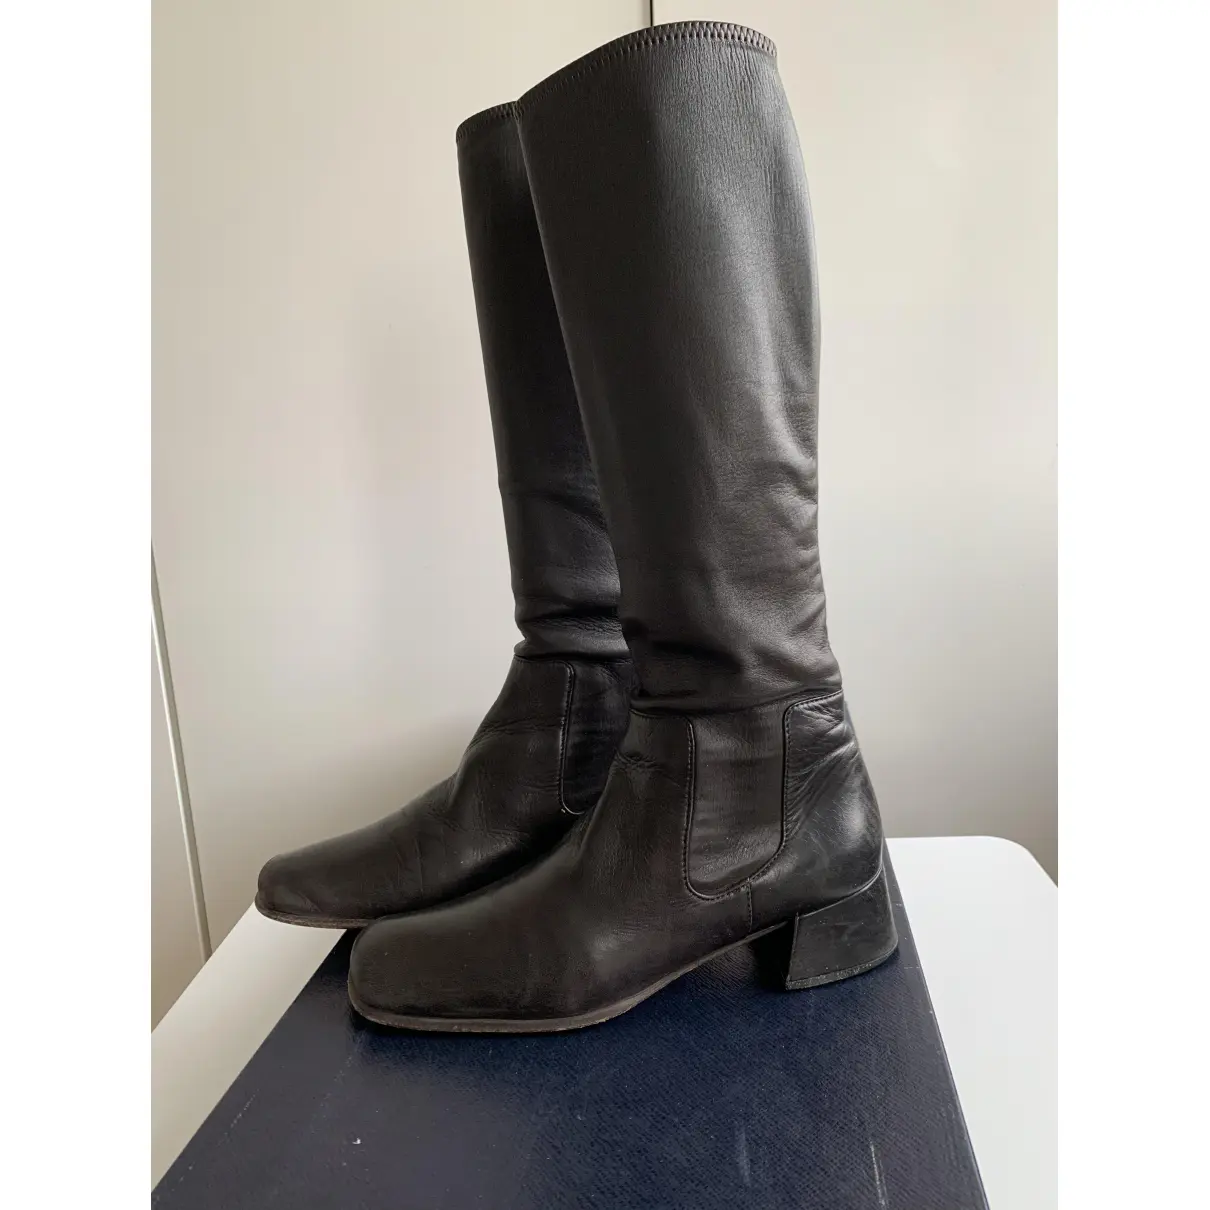 Buy Prada Leather riding boots online